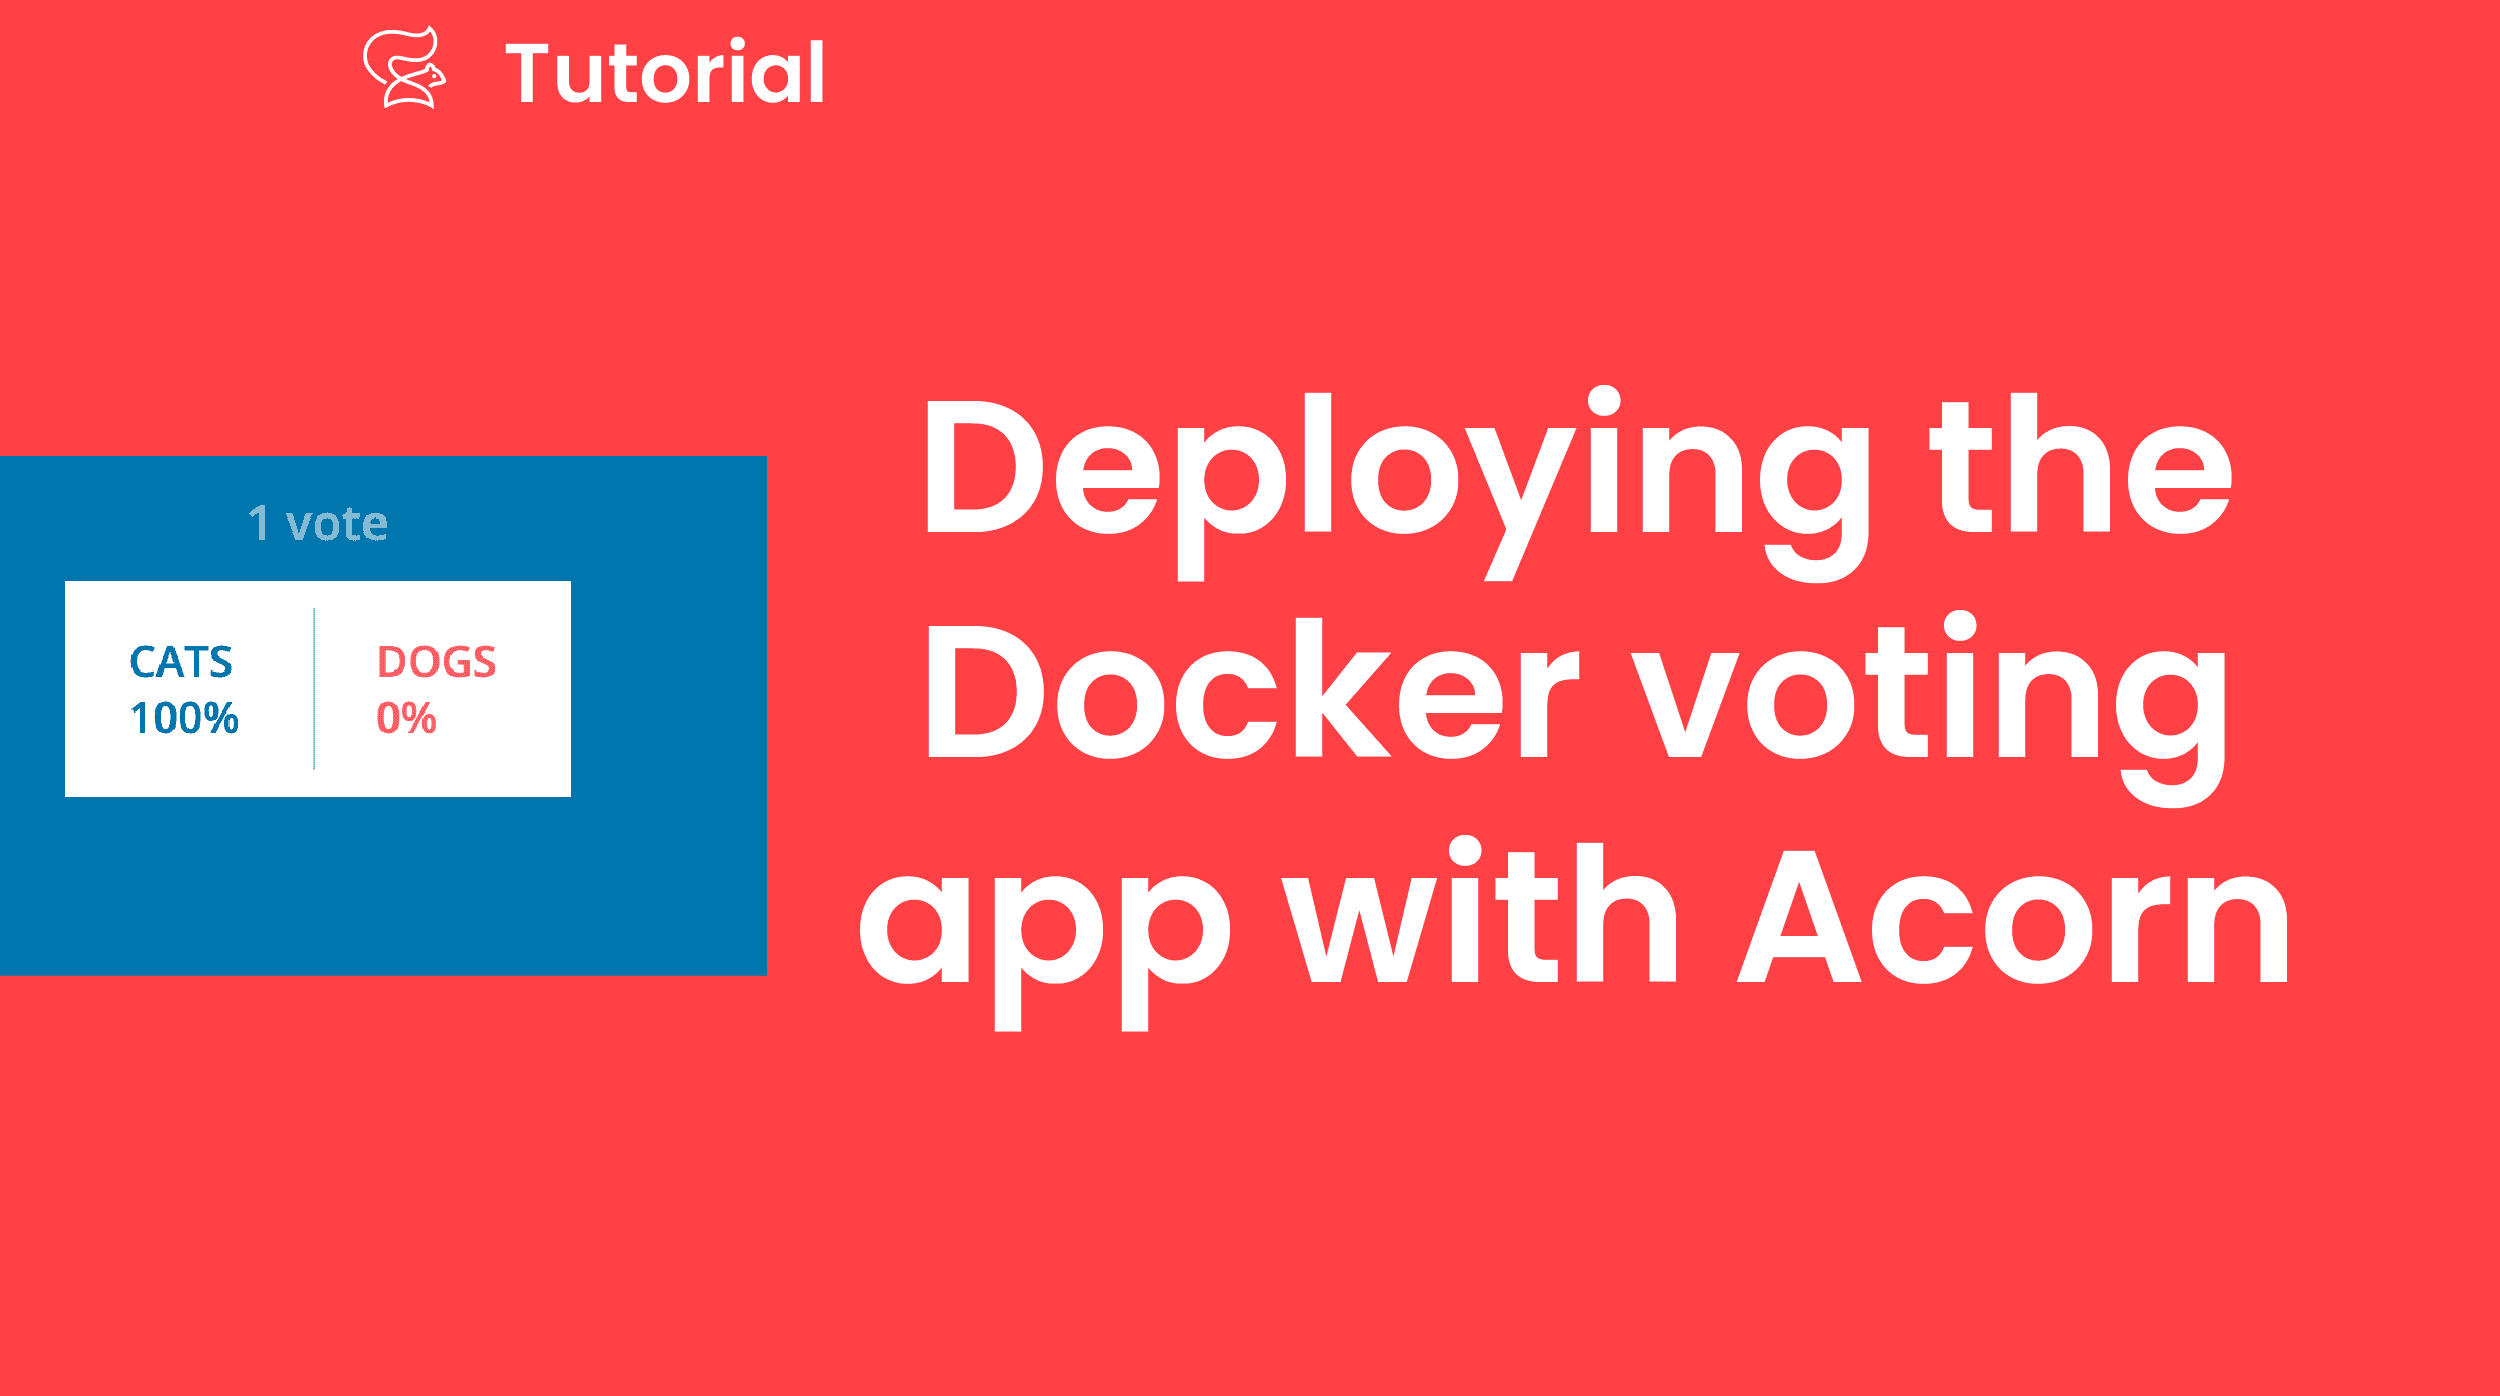 Deploying the Voting App with Acorn